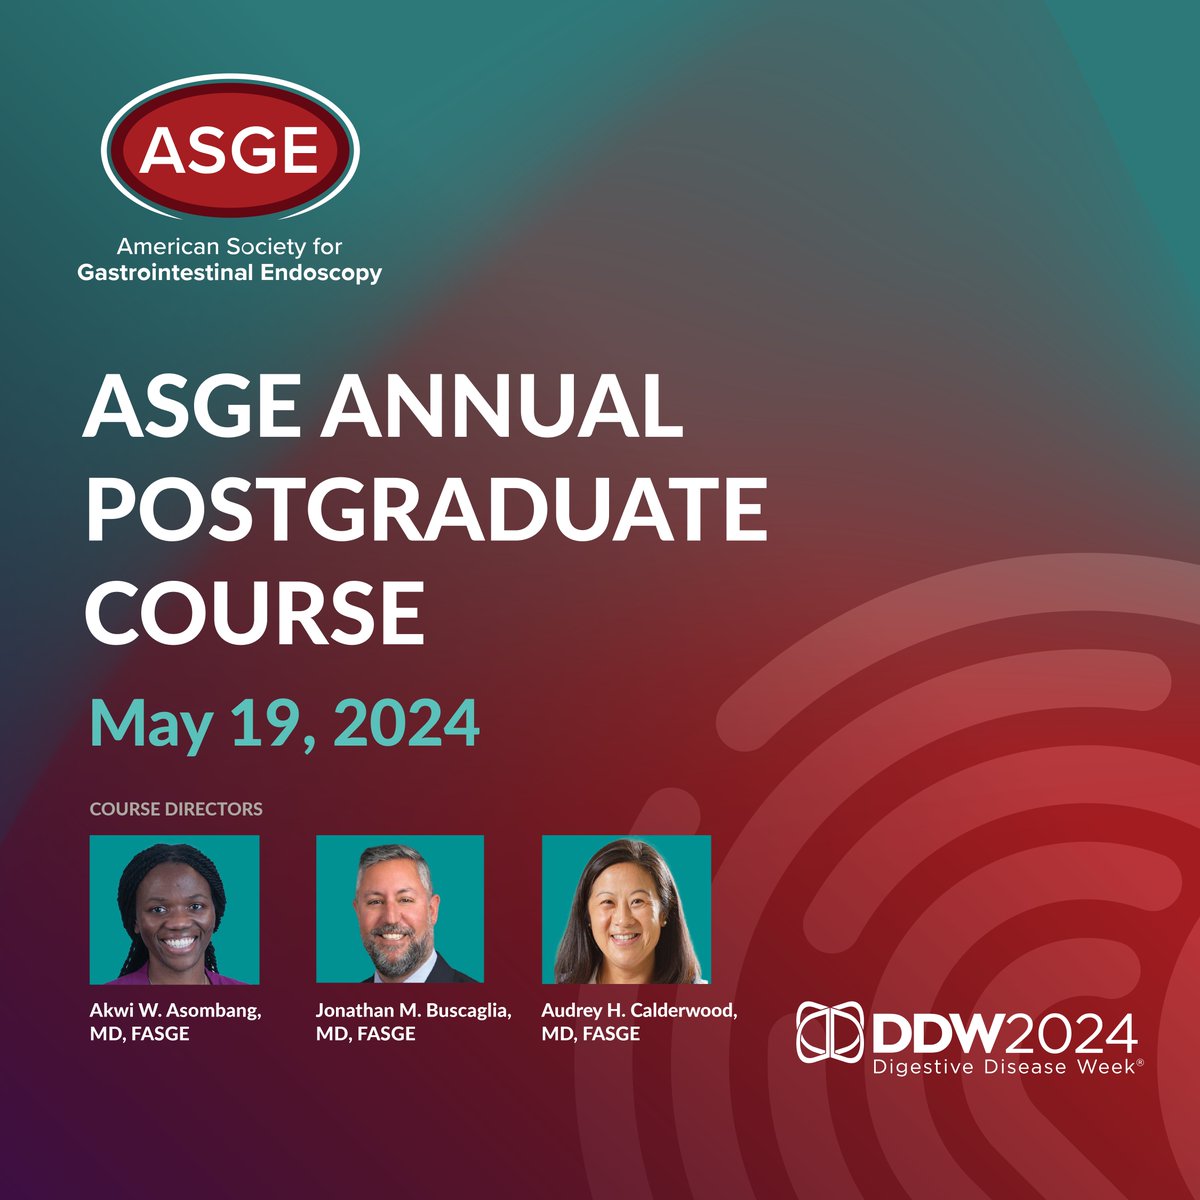 ASGE's Annual Postgraduate Course at #DDW2024 is fast approaching on May 19! Led by Course Directors @AkwiAsombangMD, @JonathanBuscag1 &@AudreyGIdoc, explore topics such as pancreatobiliary disease states, esophageal disorders and more. Sign up at hubs.ly/Q02wn85H0!